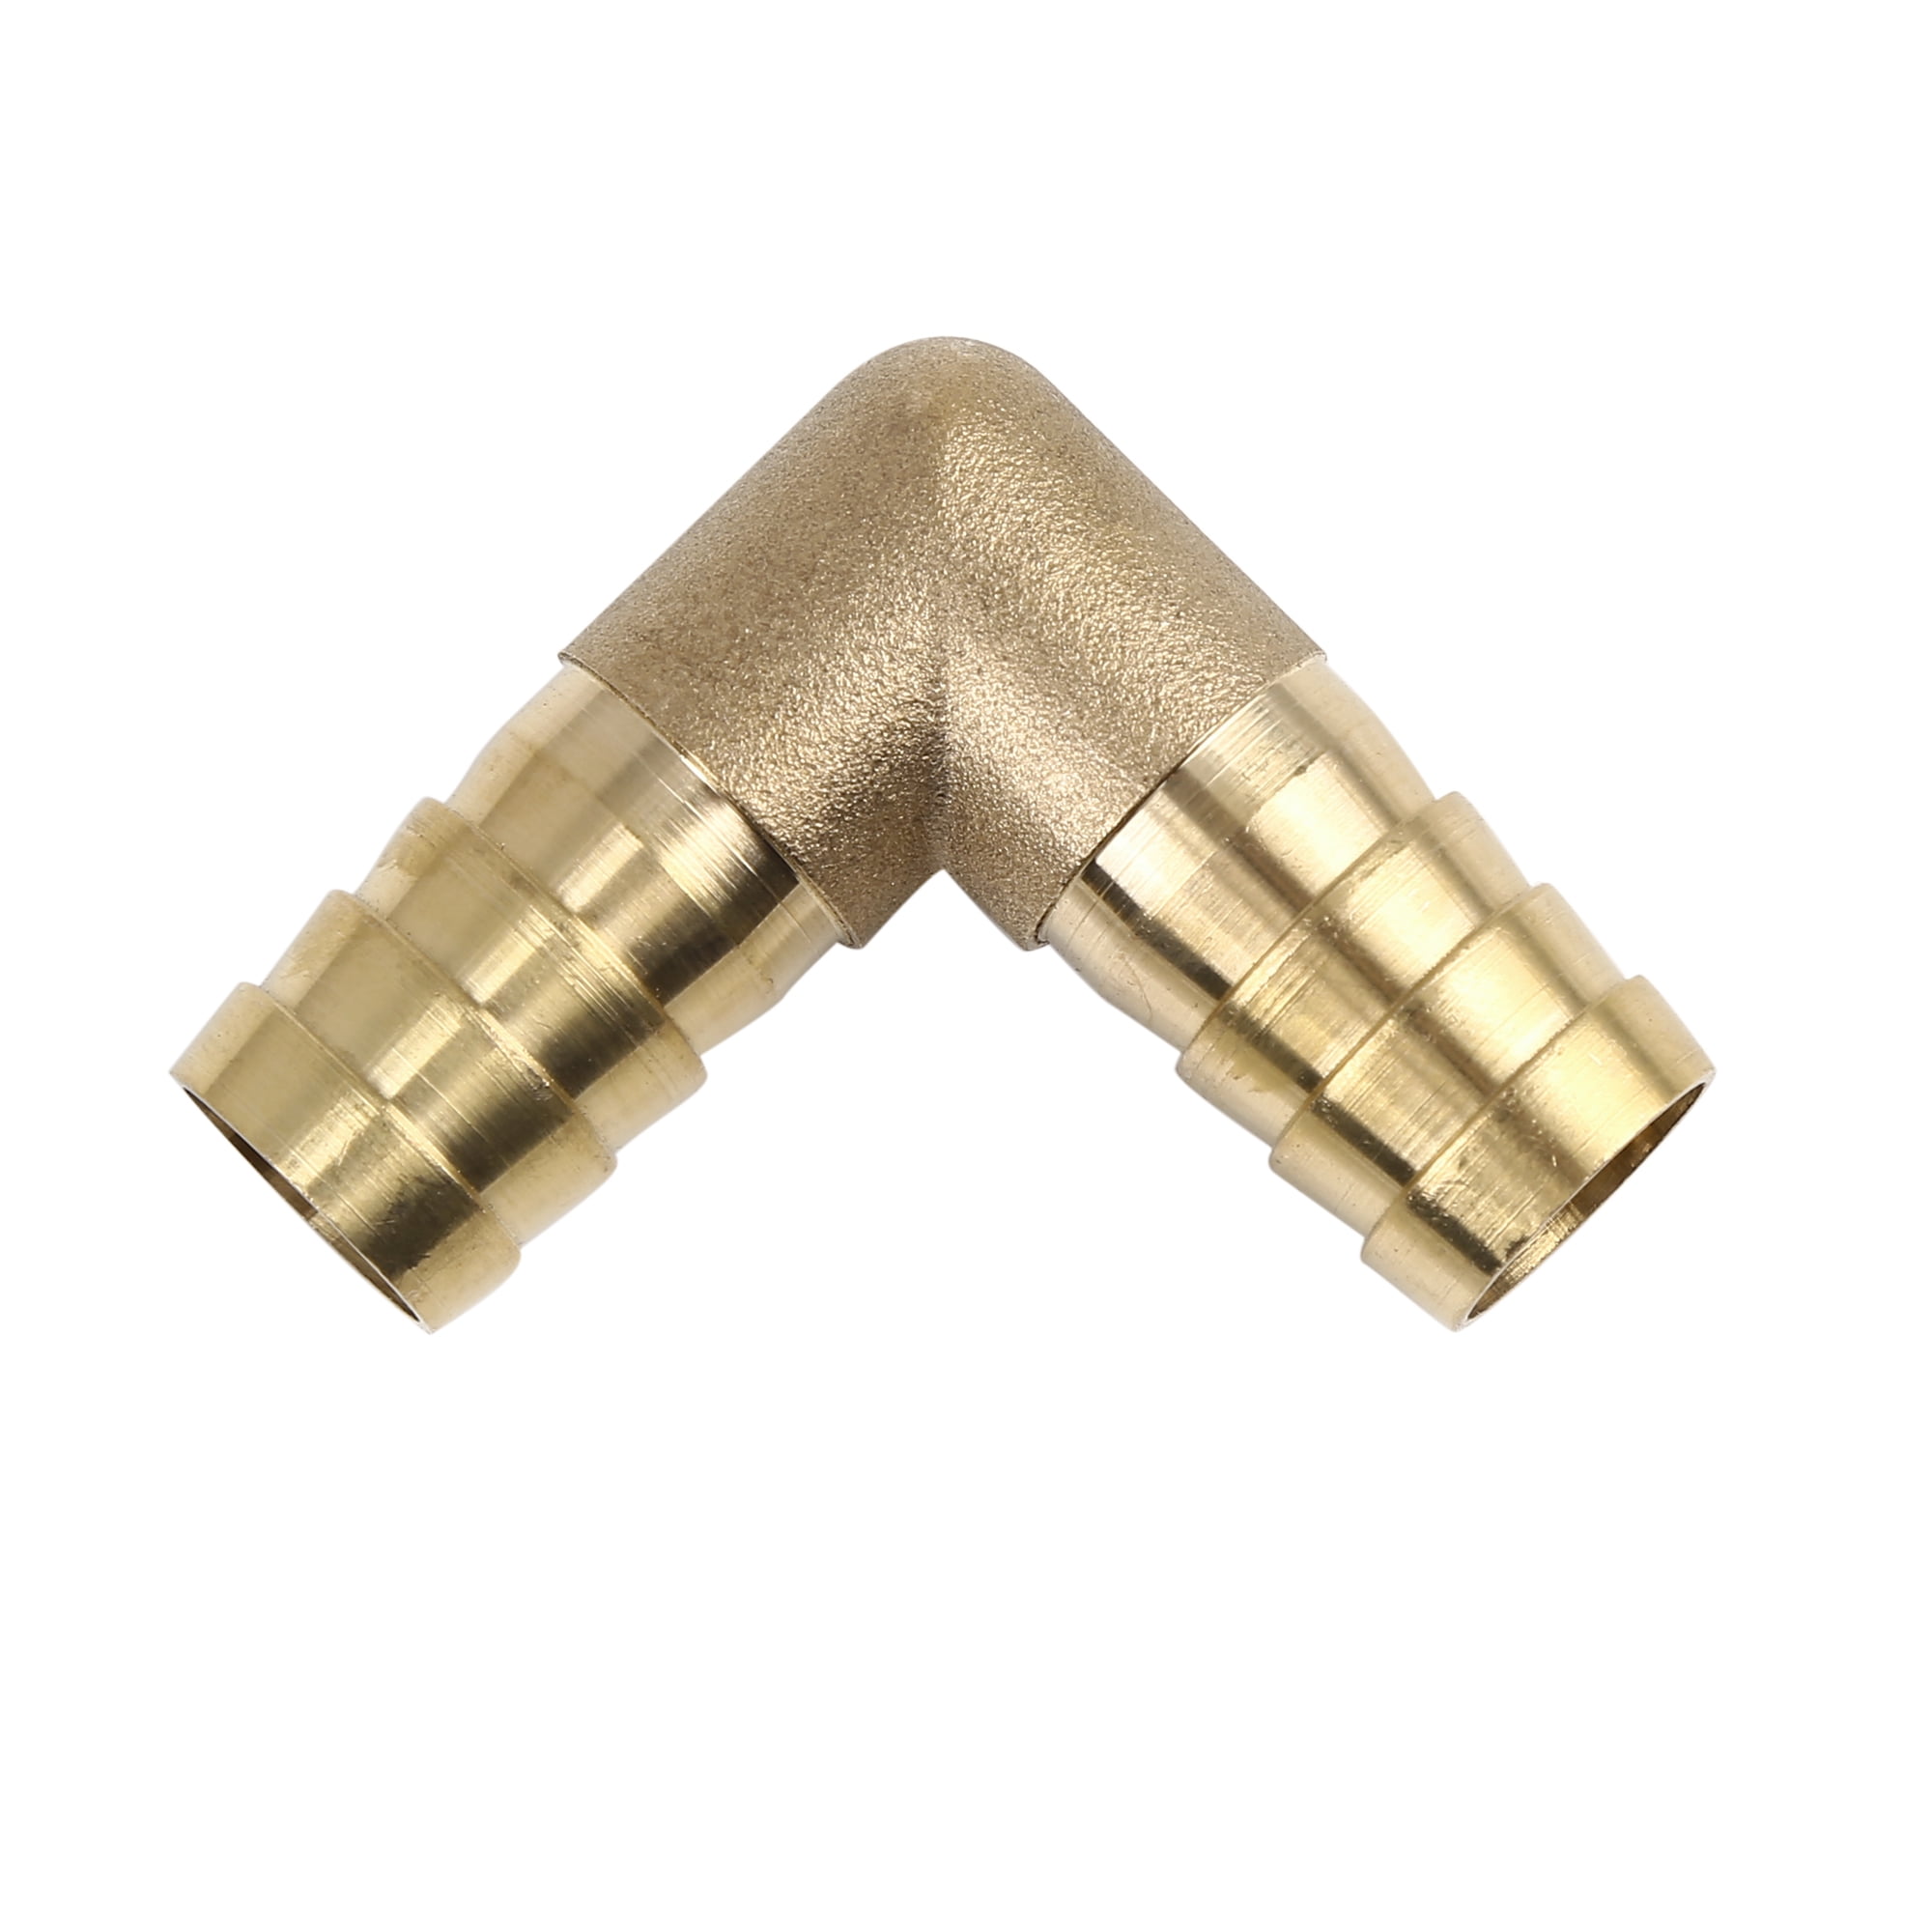 13mm Brass Barbed 90 Degree Elbow Fuel Gas Air Water Hose Joiner Adapter Fitting 